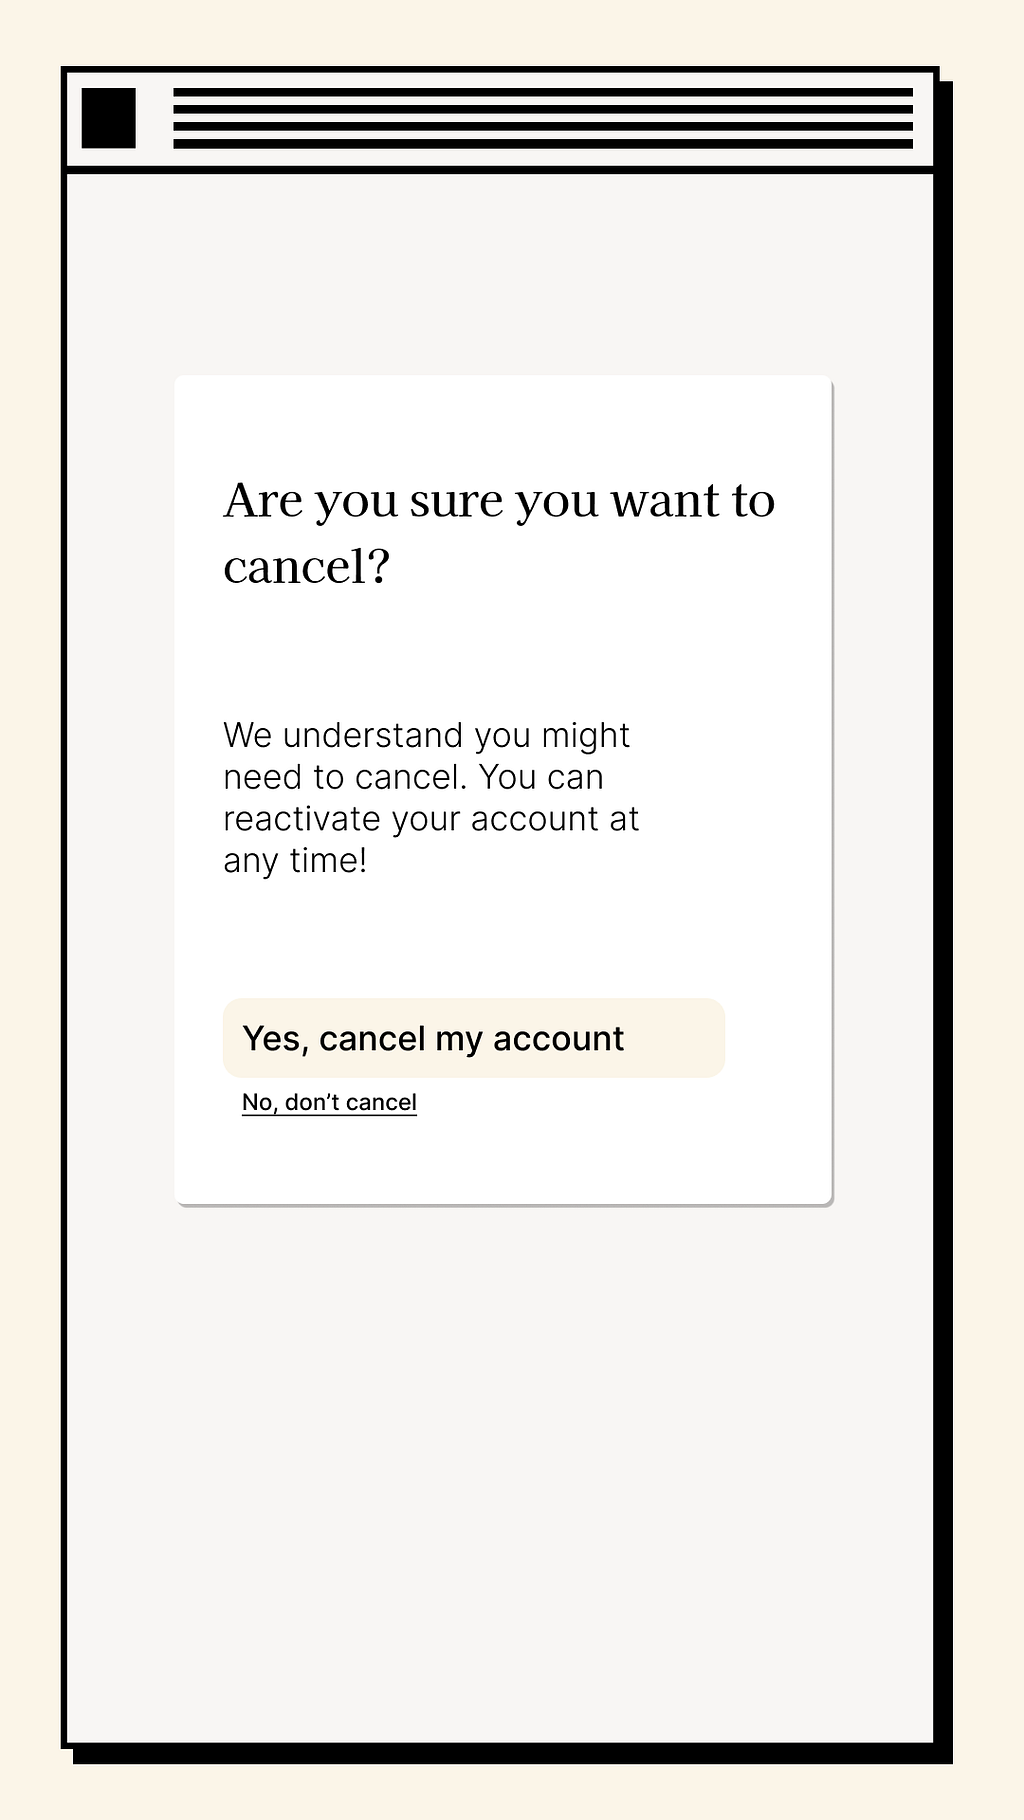 Example cancellation interface that reads: Are you sure you want to cancel? We understand you might need to cancel. You can reactivate your account at any time! Yes, cancel my account No, don’t cancel